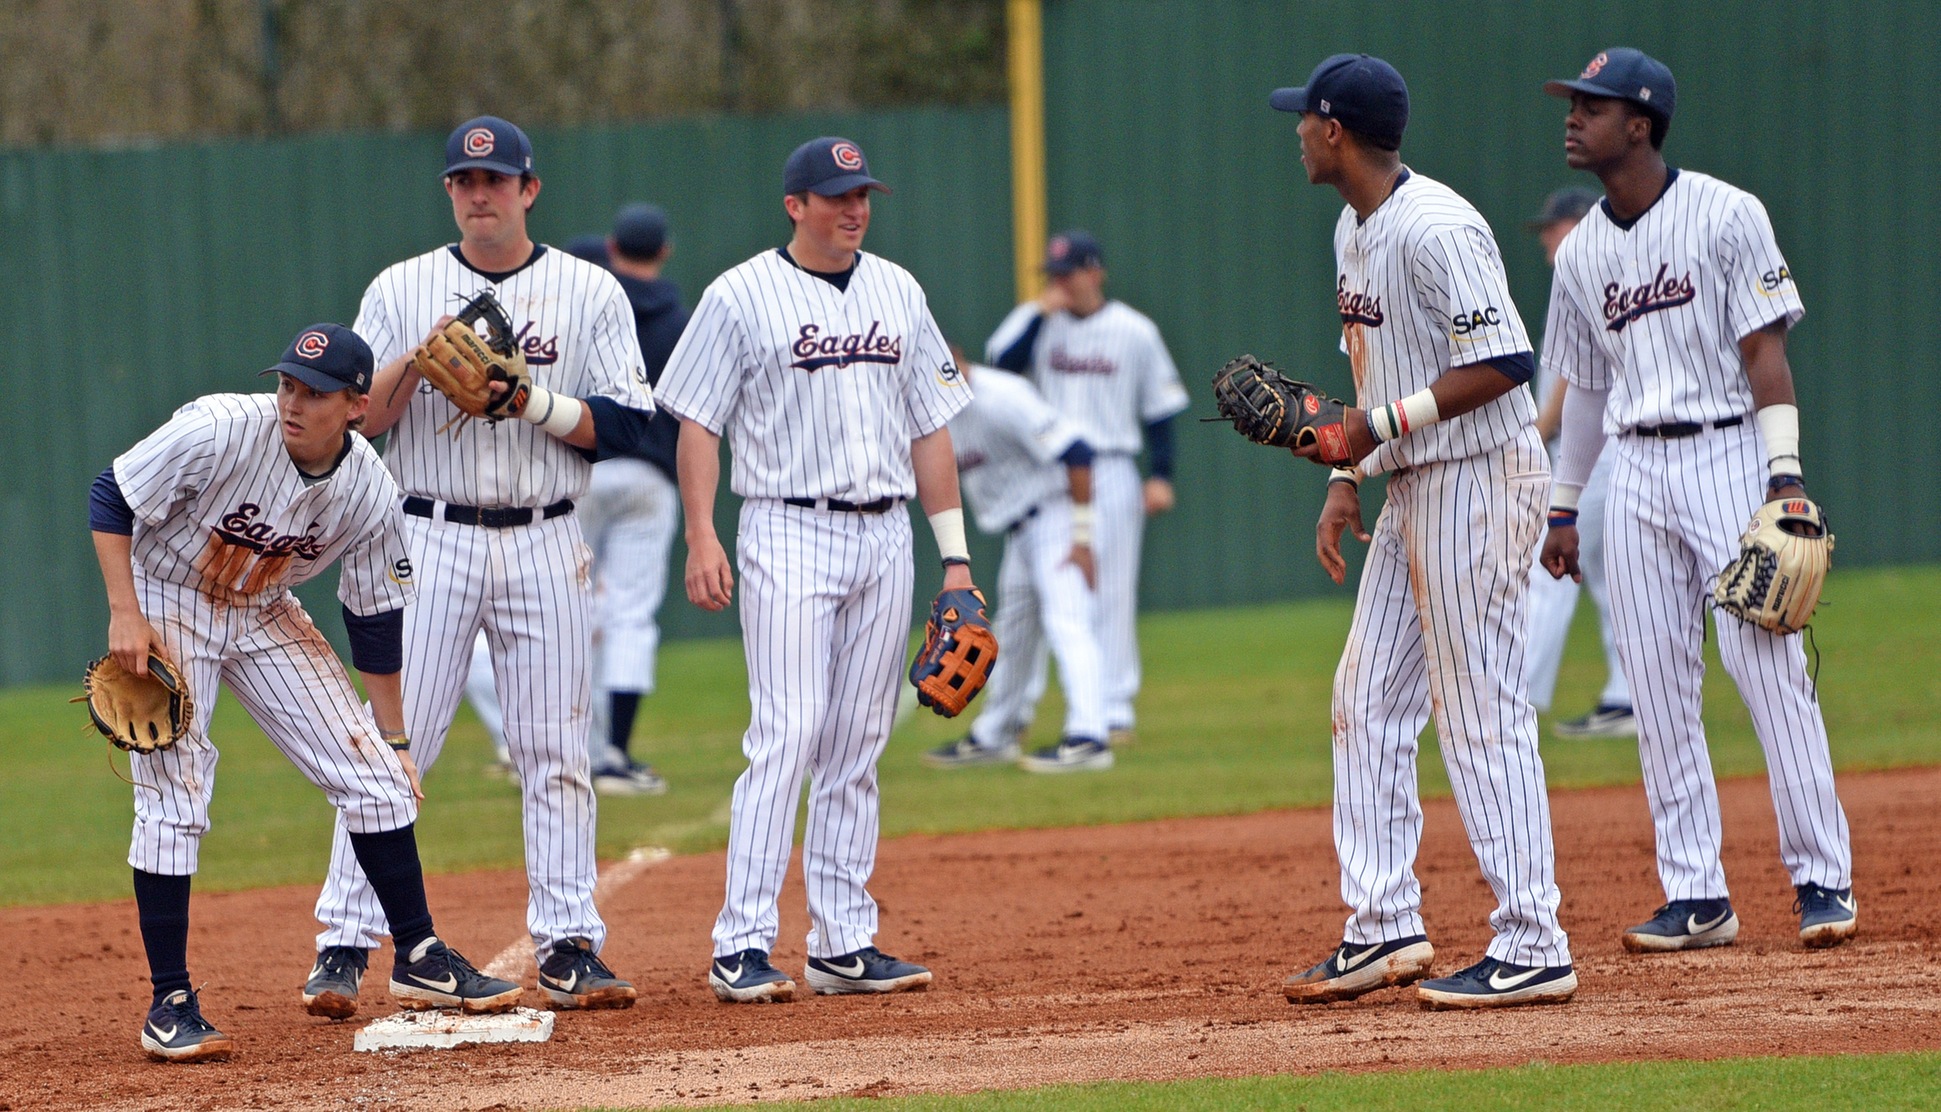 Griffin’s group seeks series win with Tusculum in town